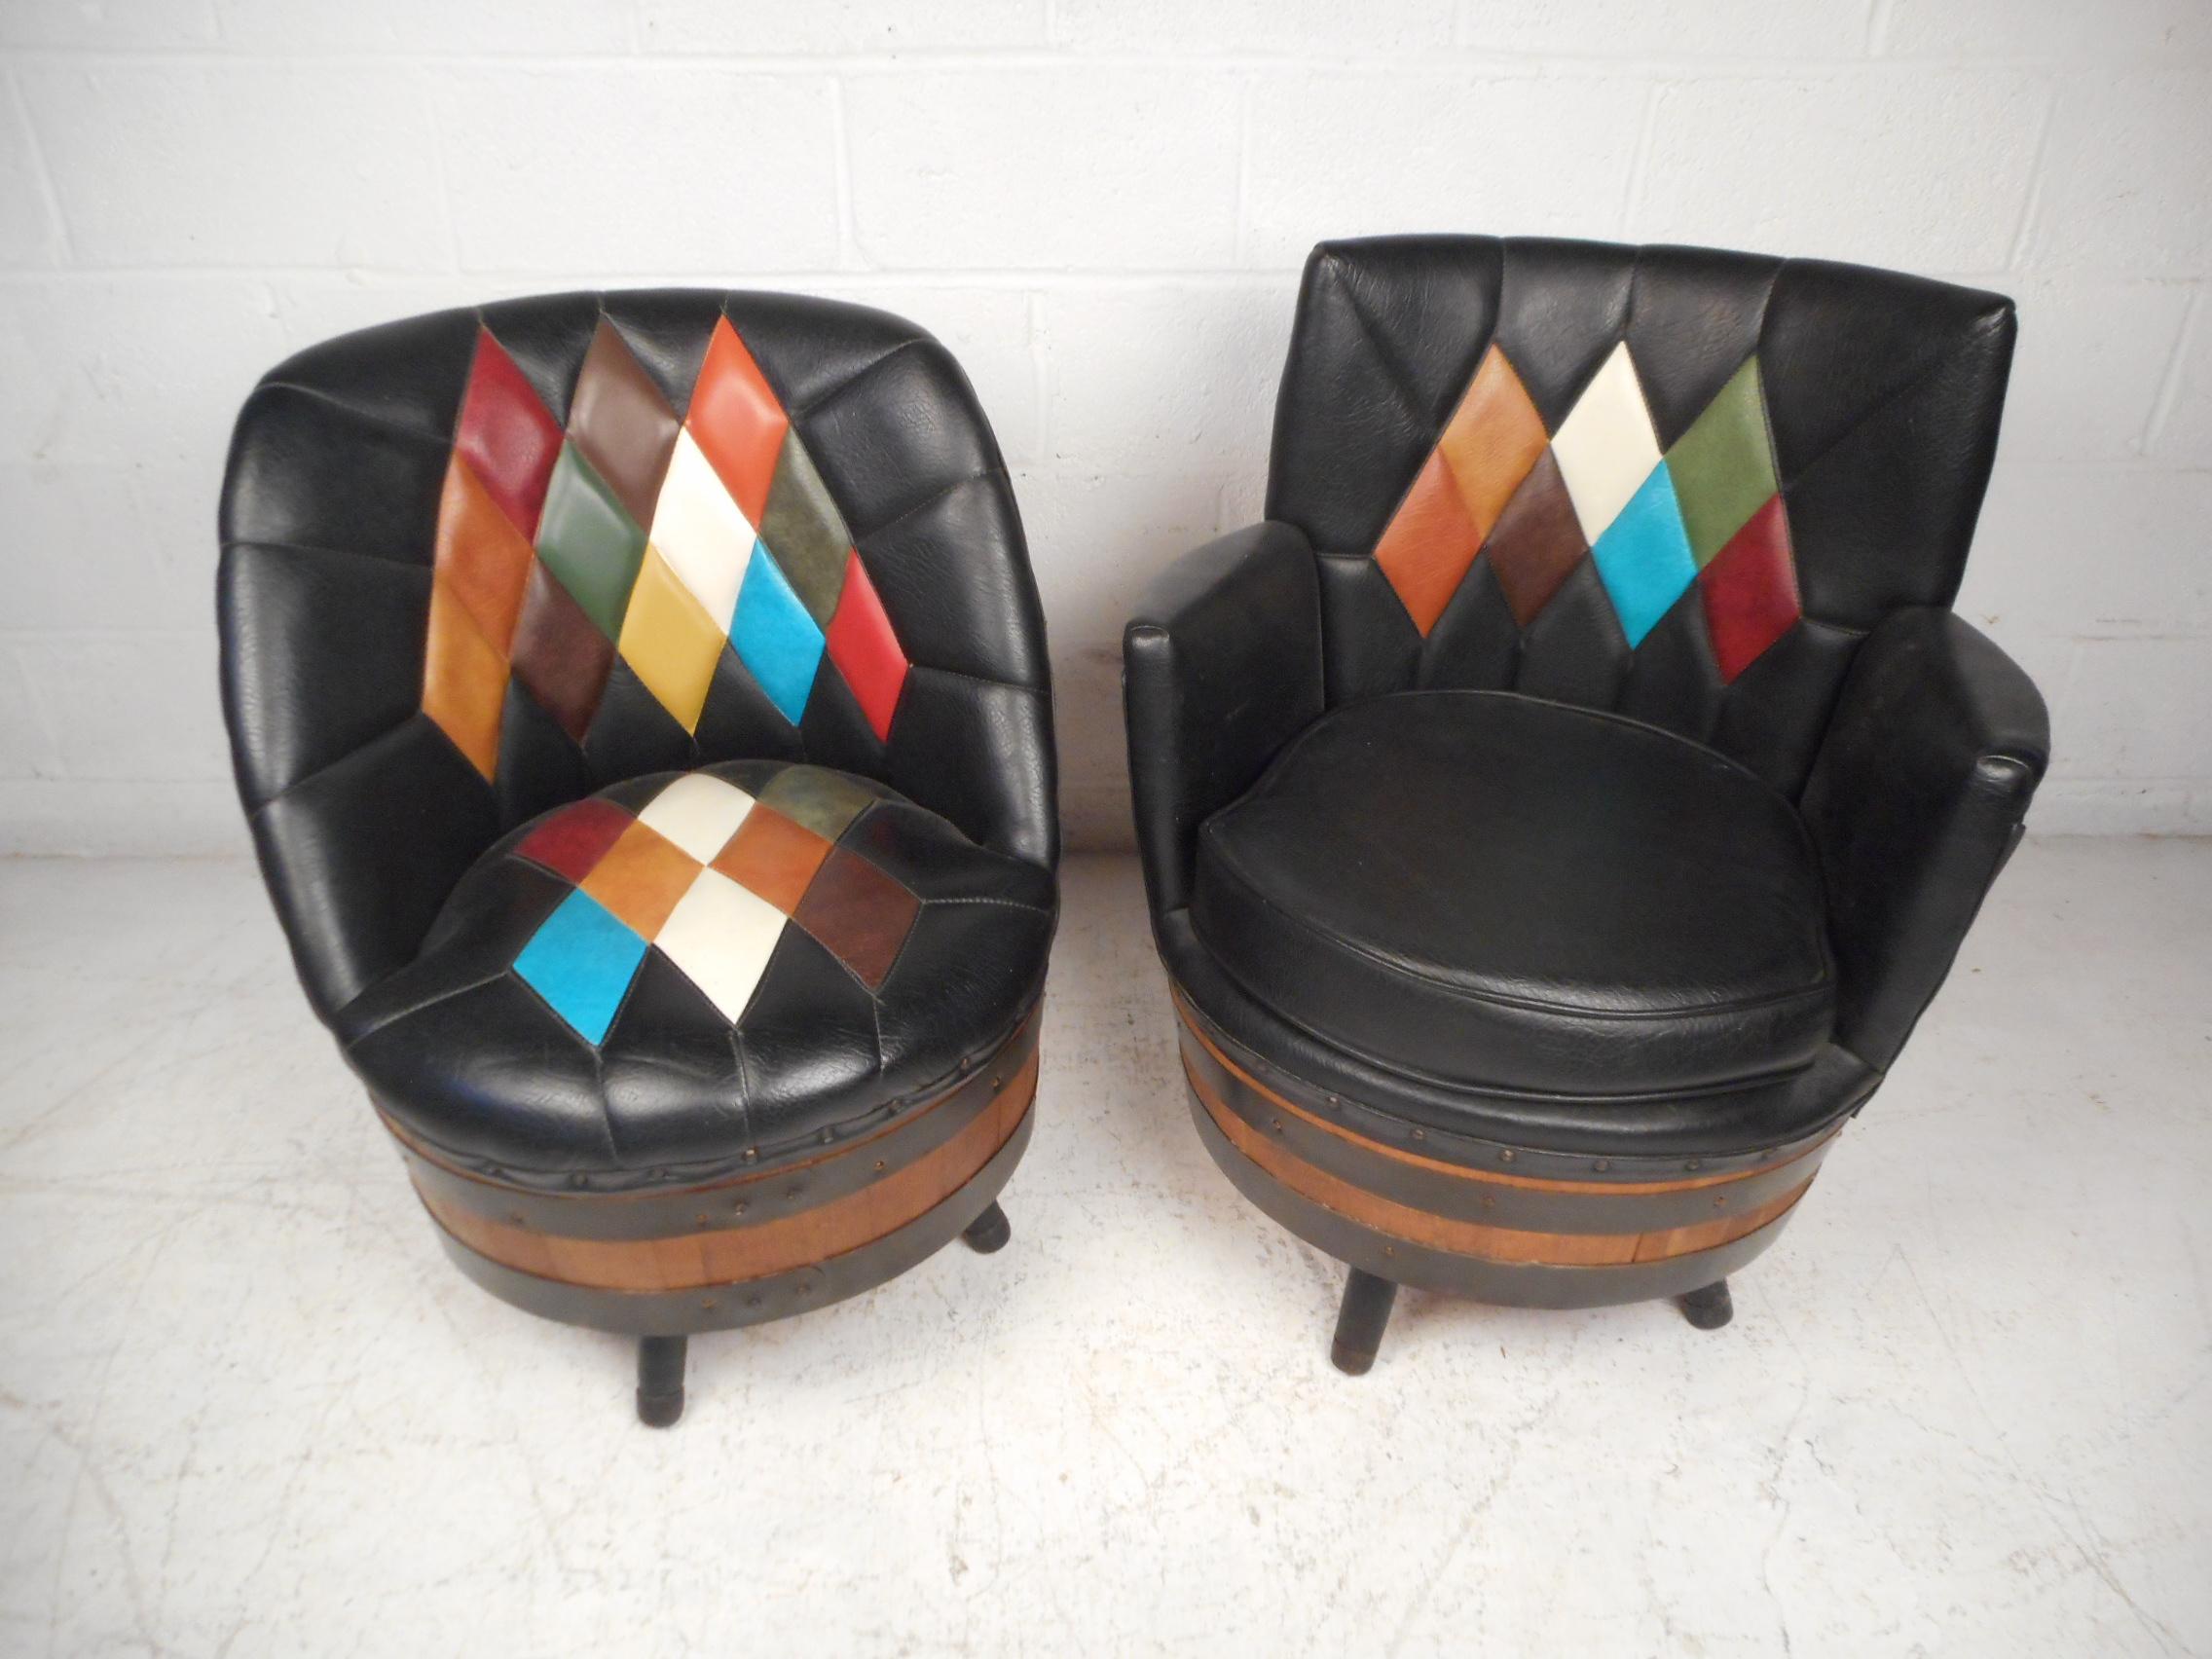 Unusual set of vintage barrel-back lounge chairs. Quite literally barrel-back chairs constructed out of whiskey/beer style barrels which serve as the frame for the chairs. The chairs have a vintage vinyl upholstery with an argyle pattern which is